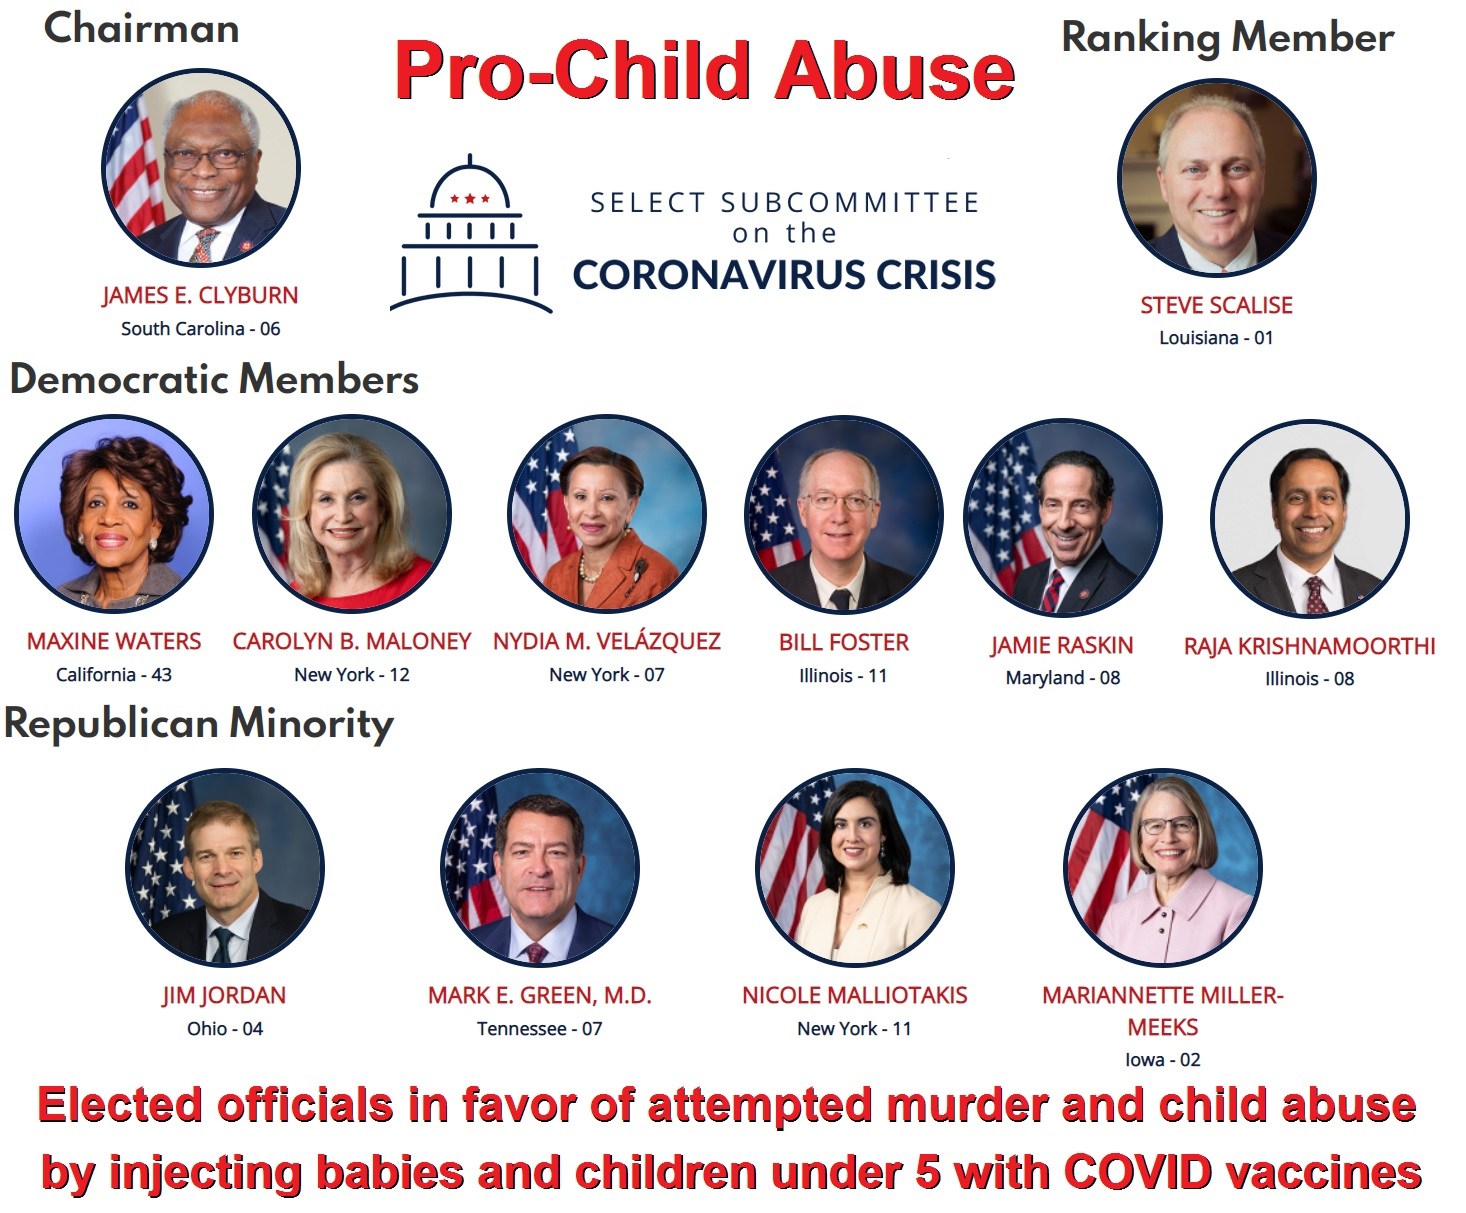 The Members of Congress Who Are Pressuring the FDA to Inject Babies and Children Under 5 with COVID Vaccines More Quickly Subcommittee-on-coronavirus-child-abusers